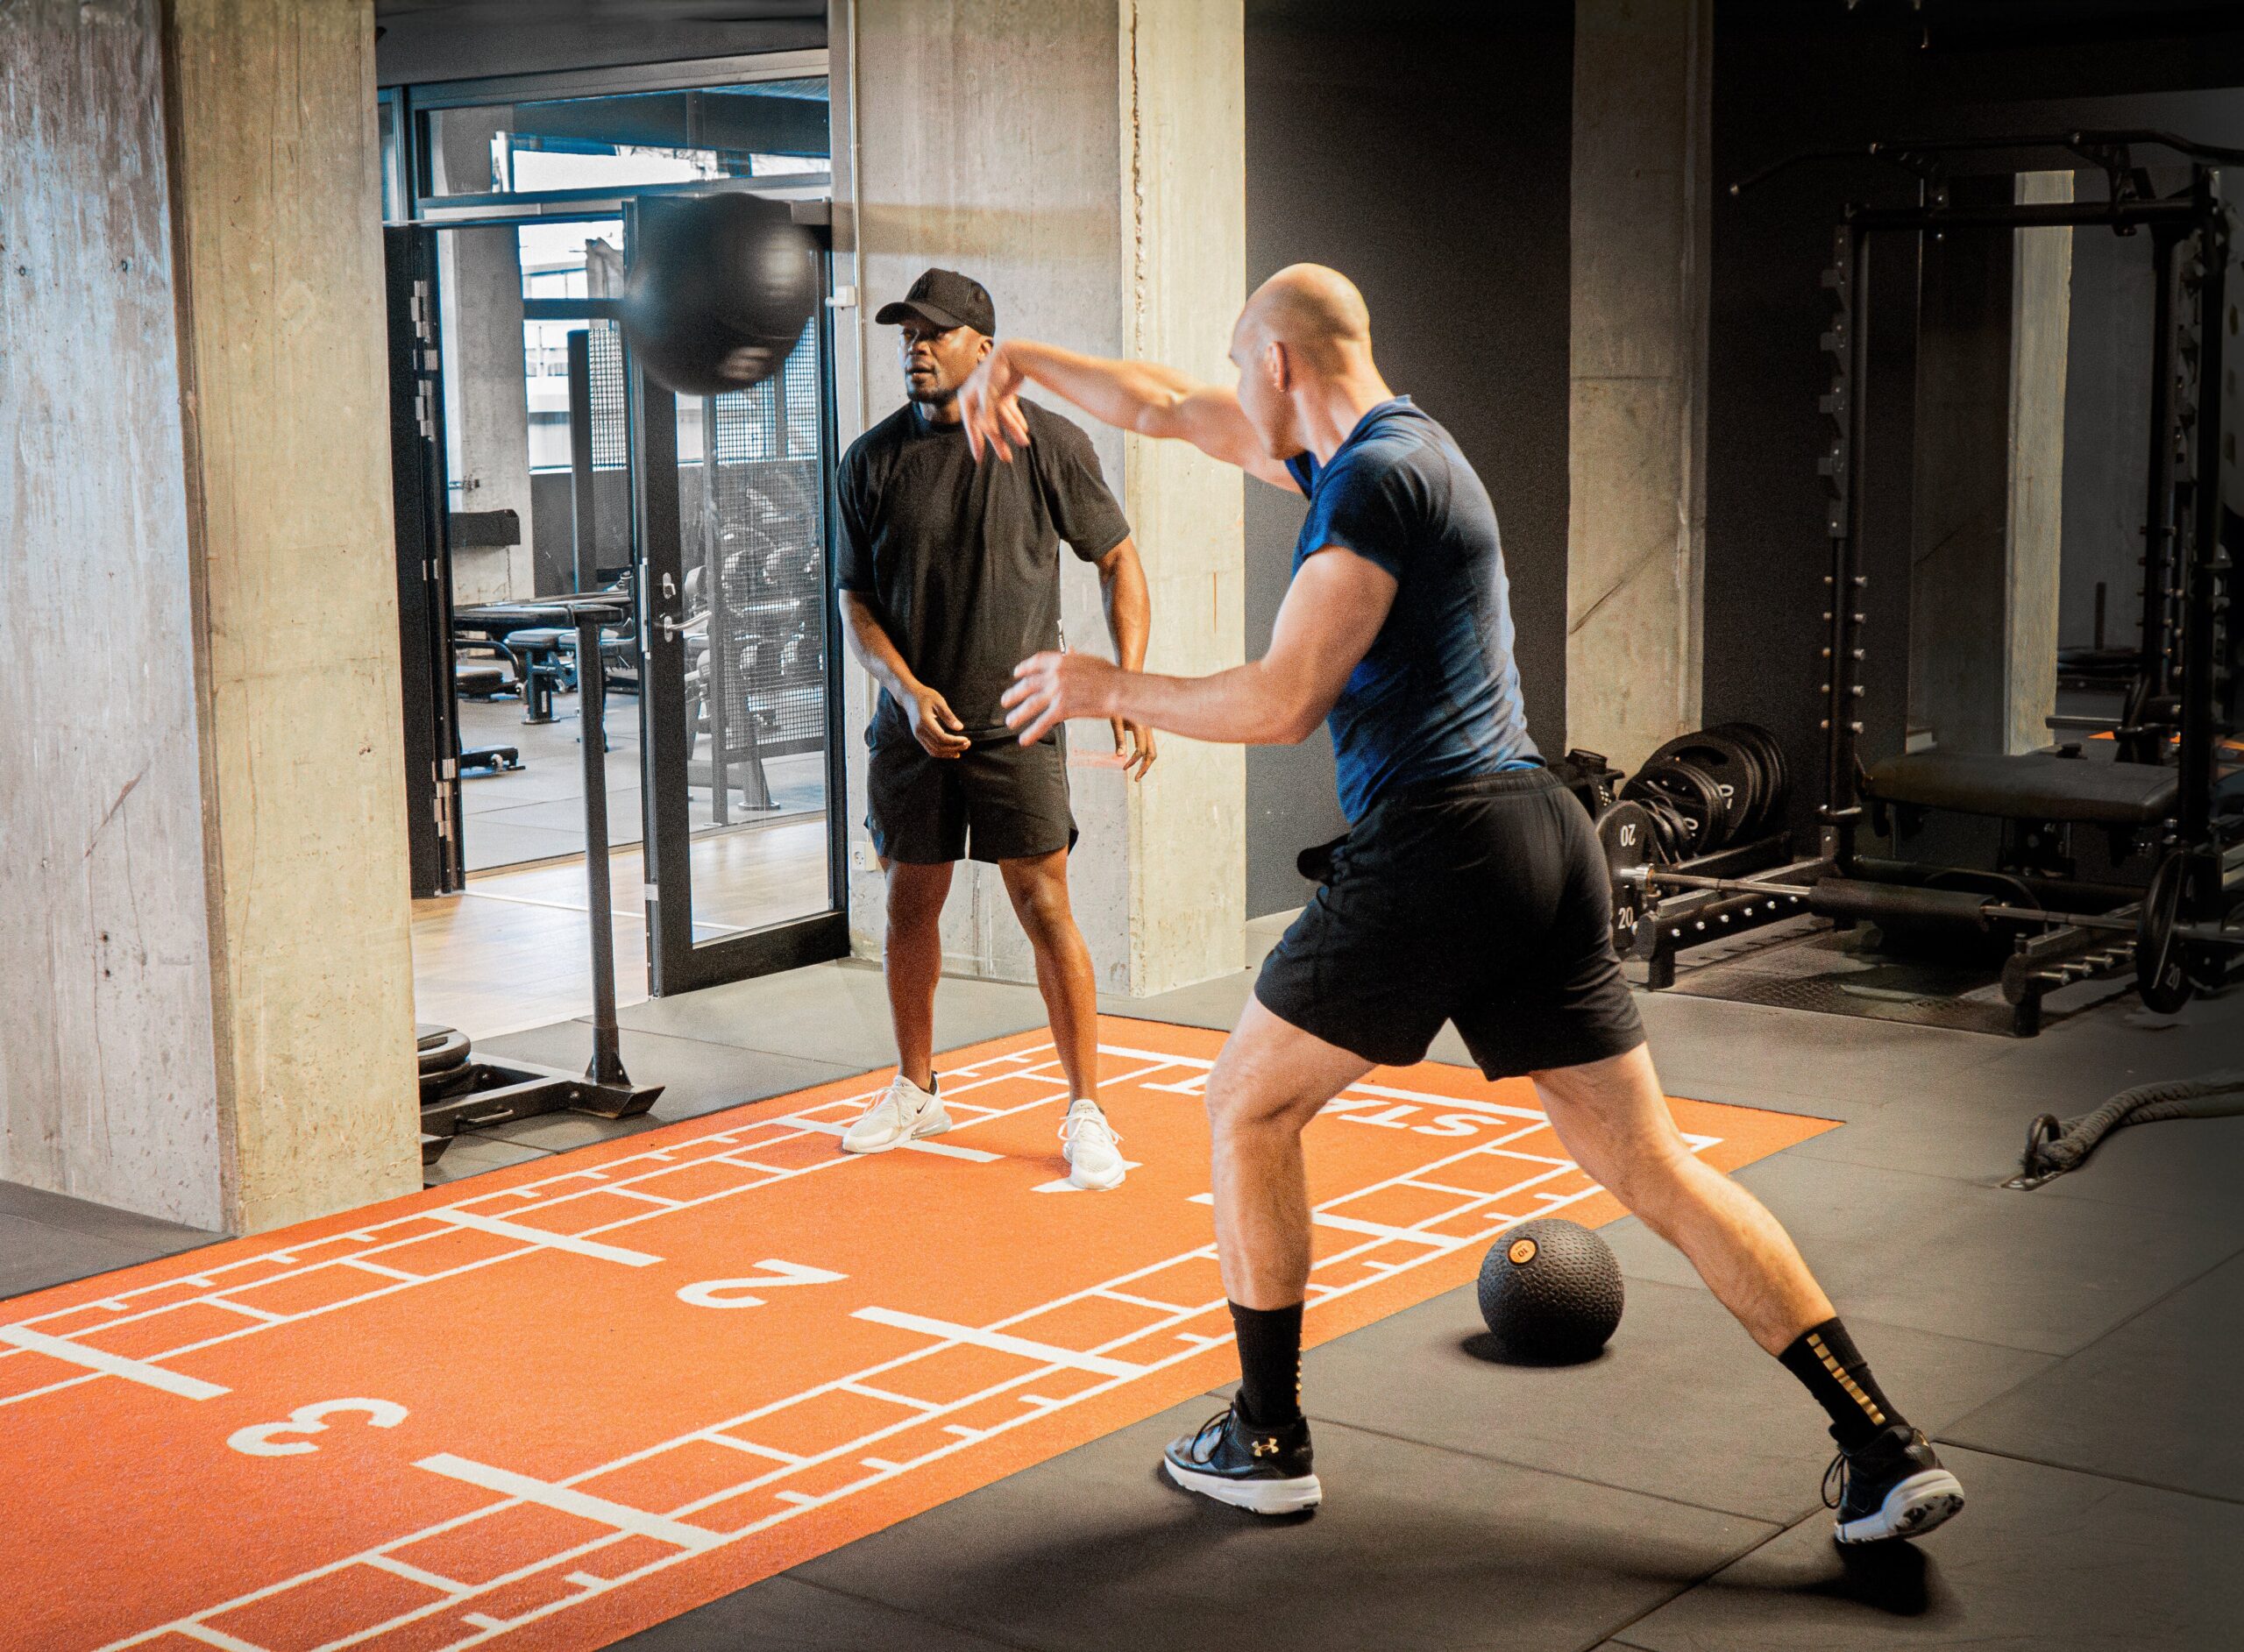 a man hitting a ball with another man in a gym